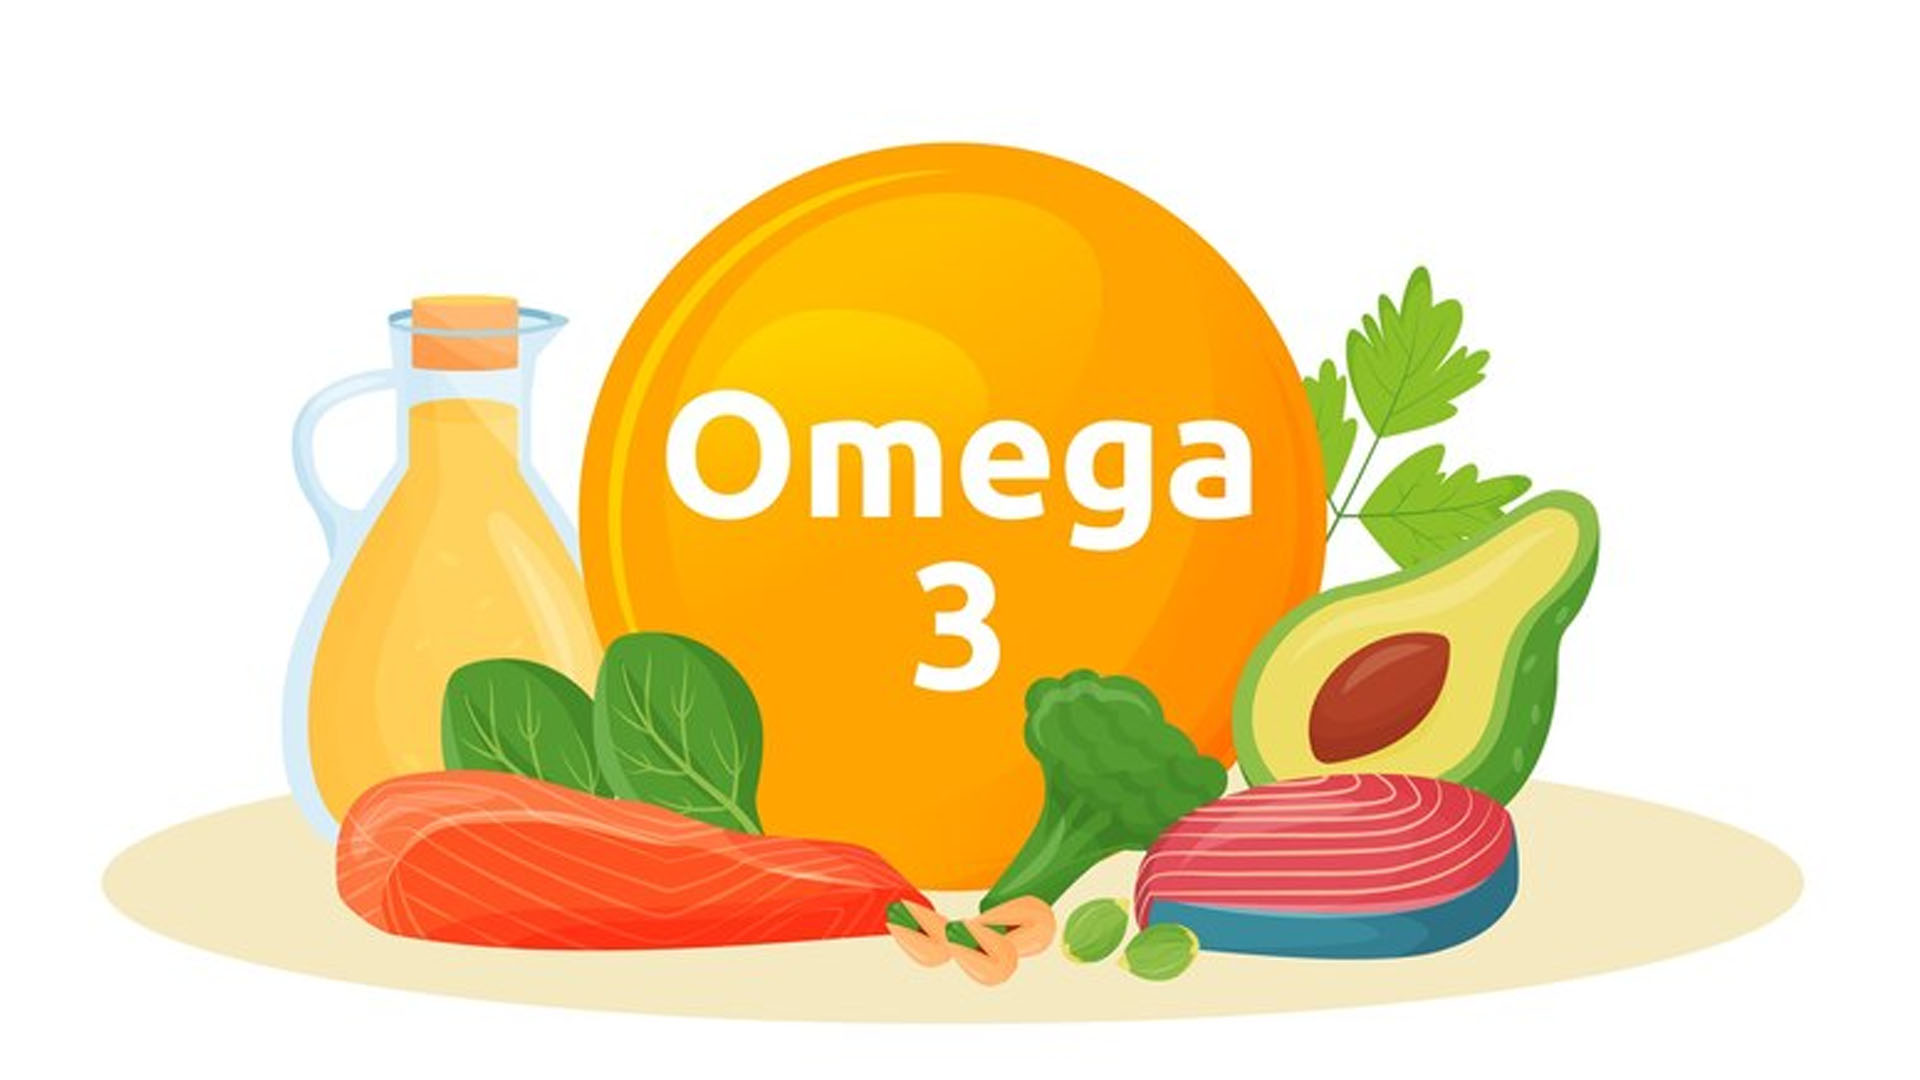 14 Plant Based and Animal Based Omega-3 Rich Foods – 